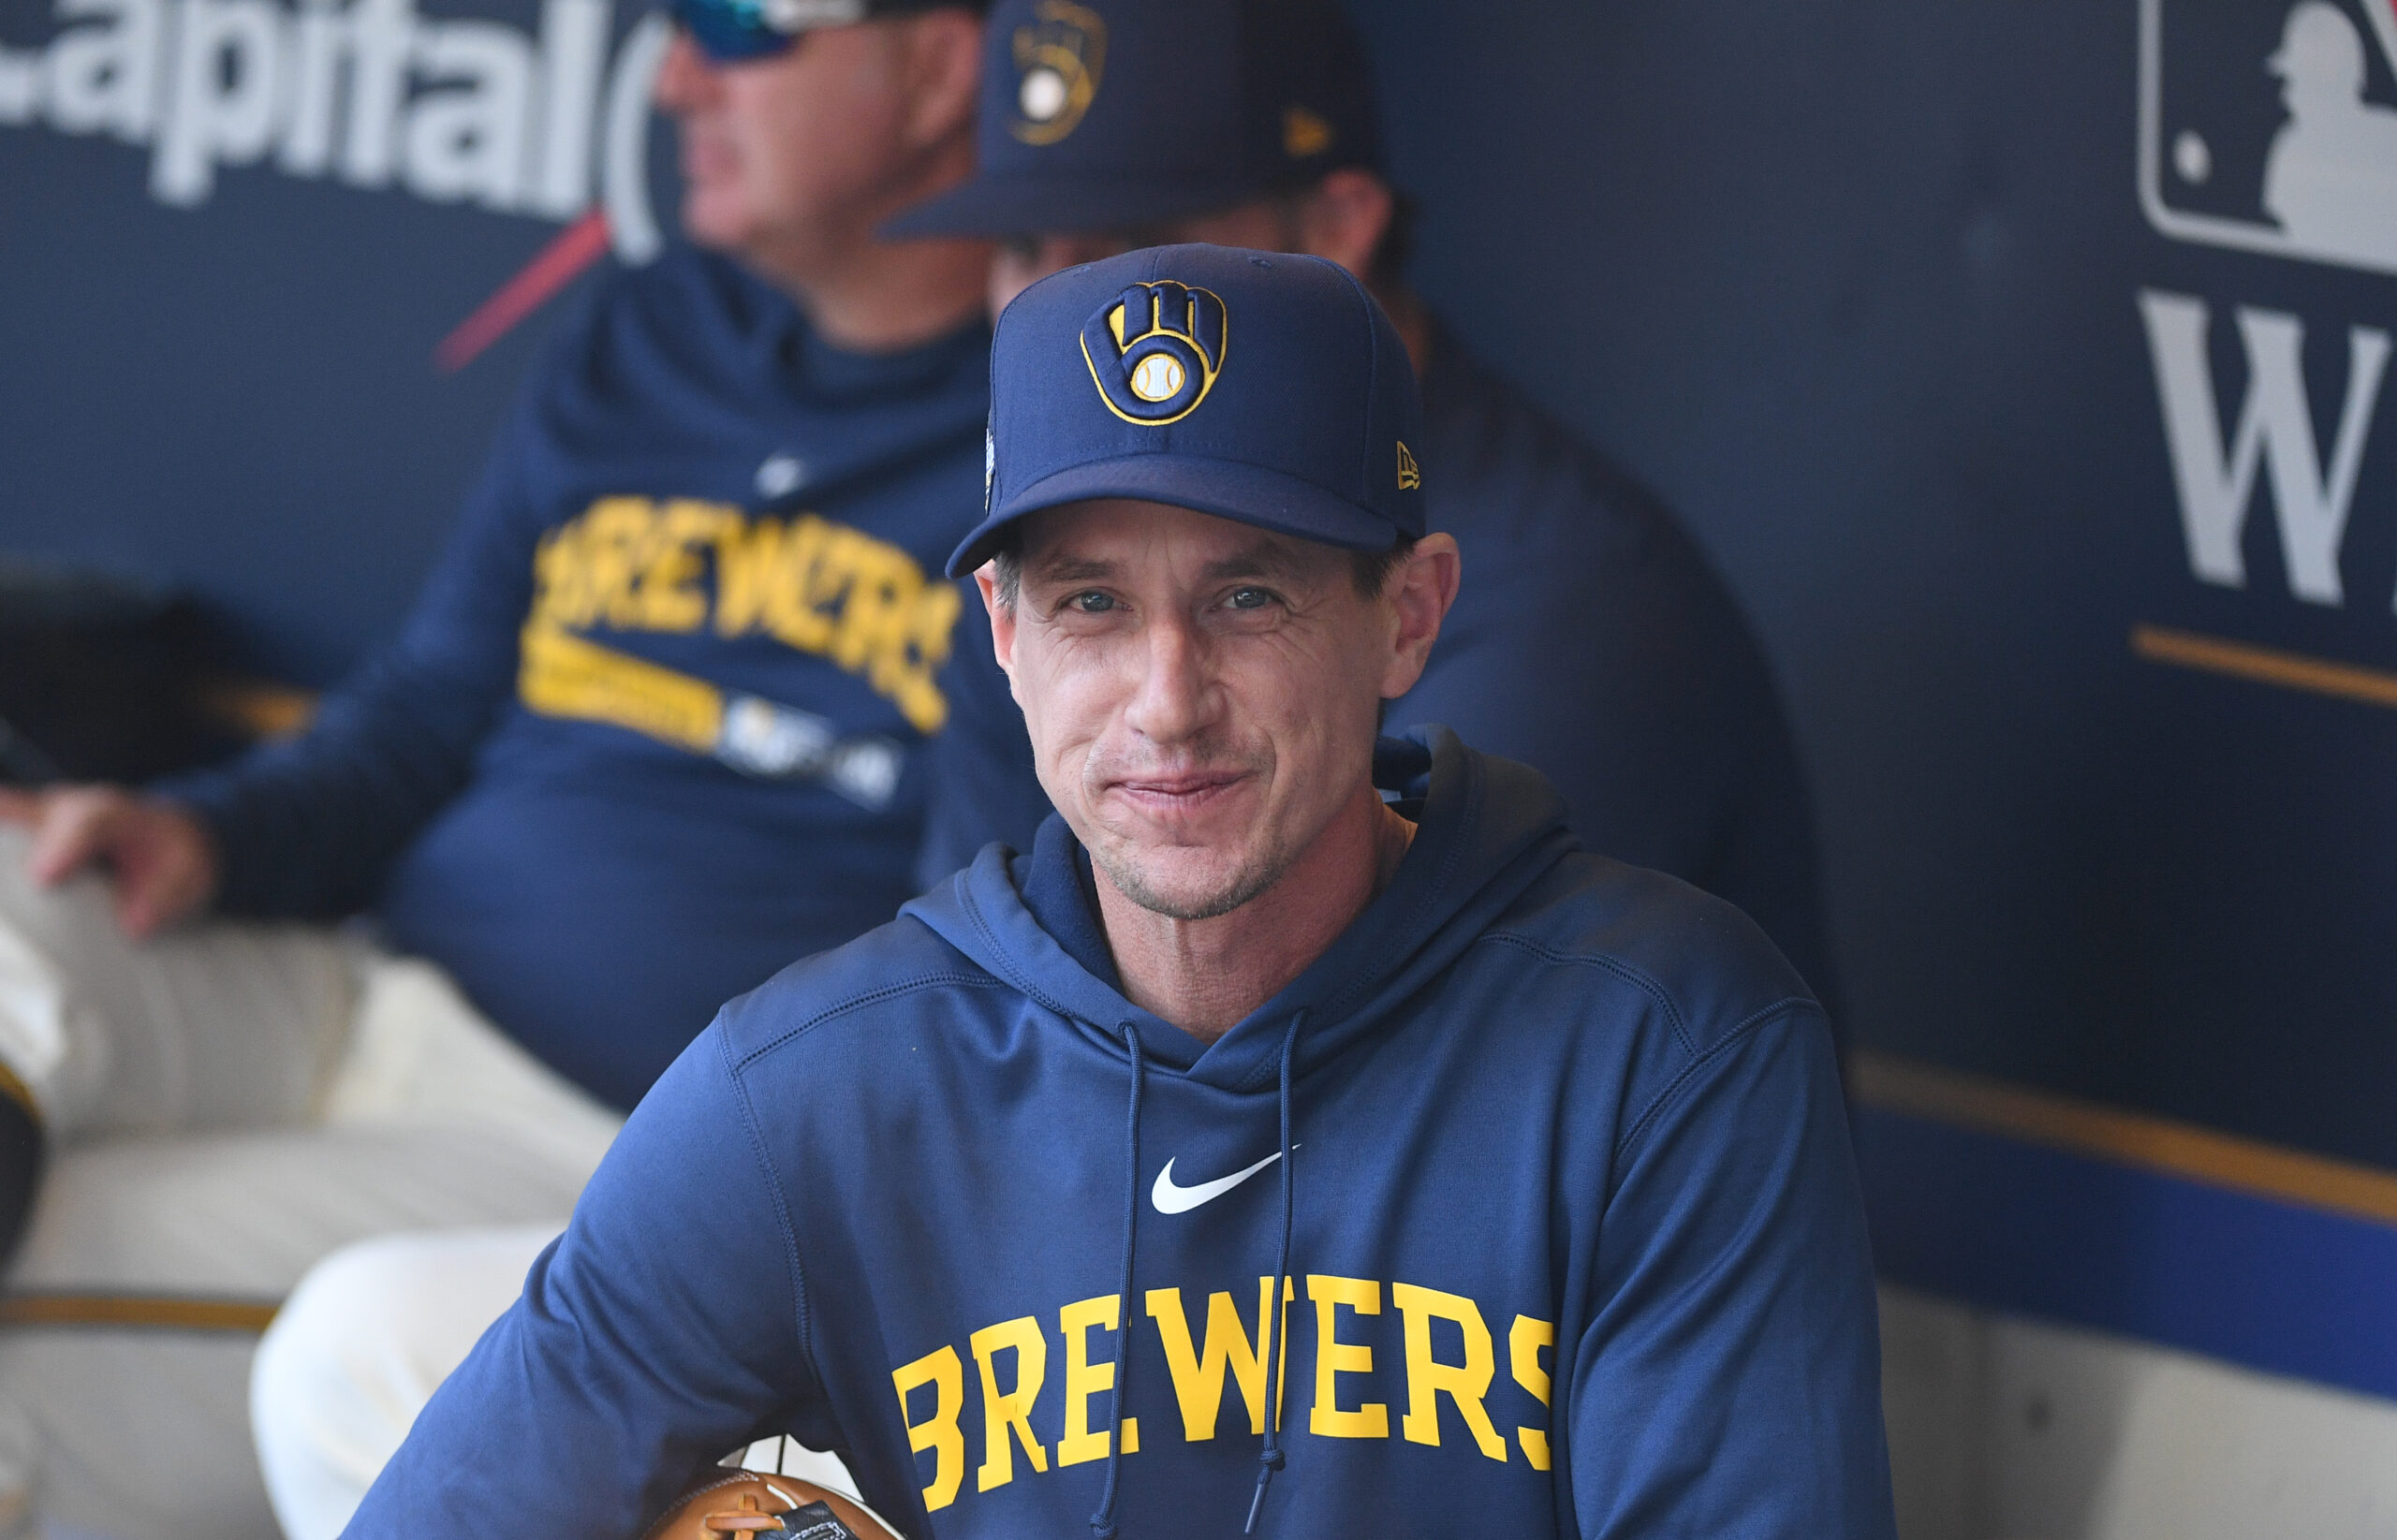 Brewers News: Craig Counsell Names Crew's 2022 Opening Day Starter